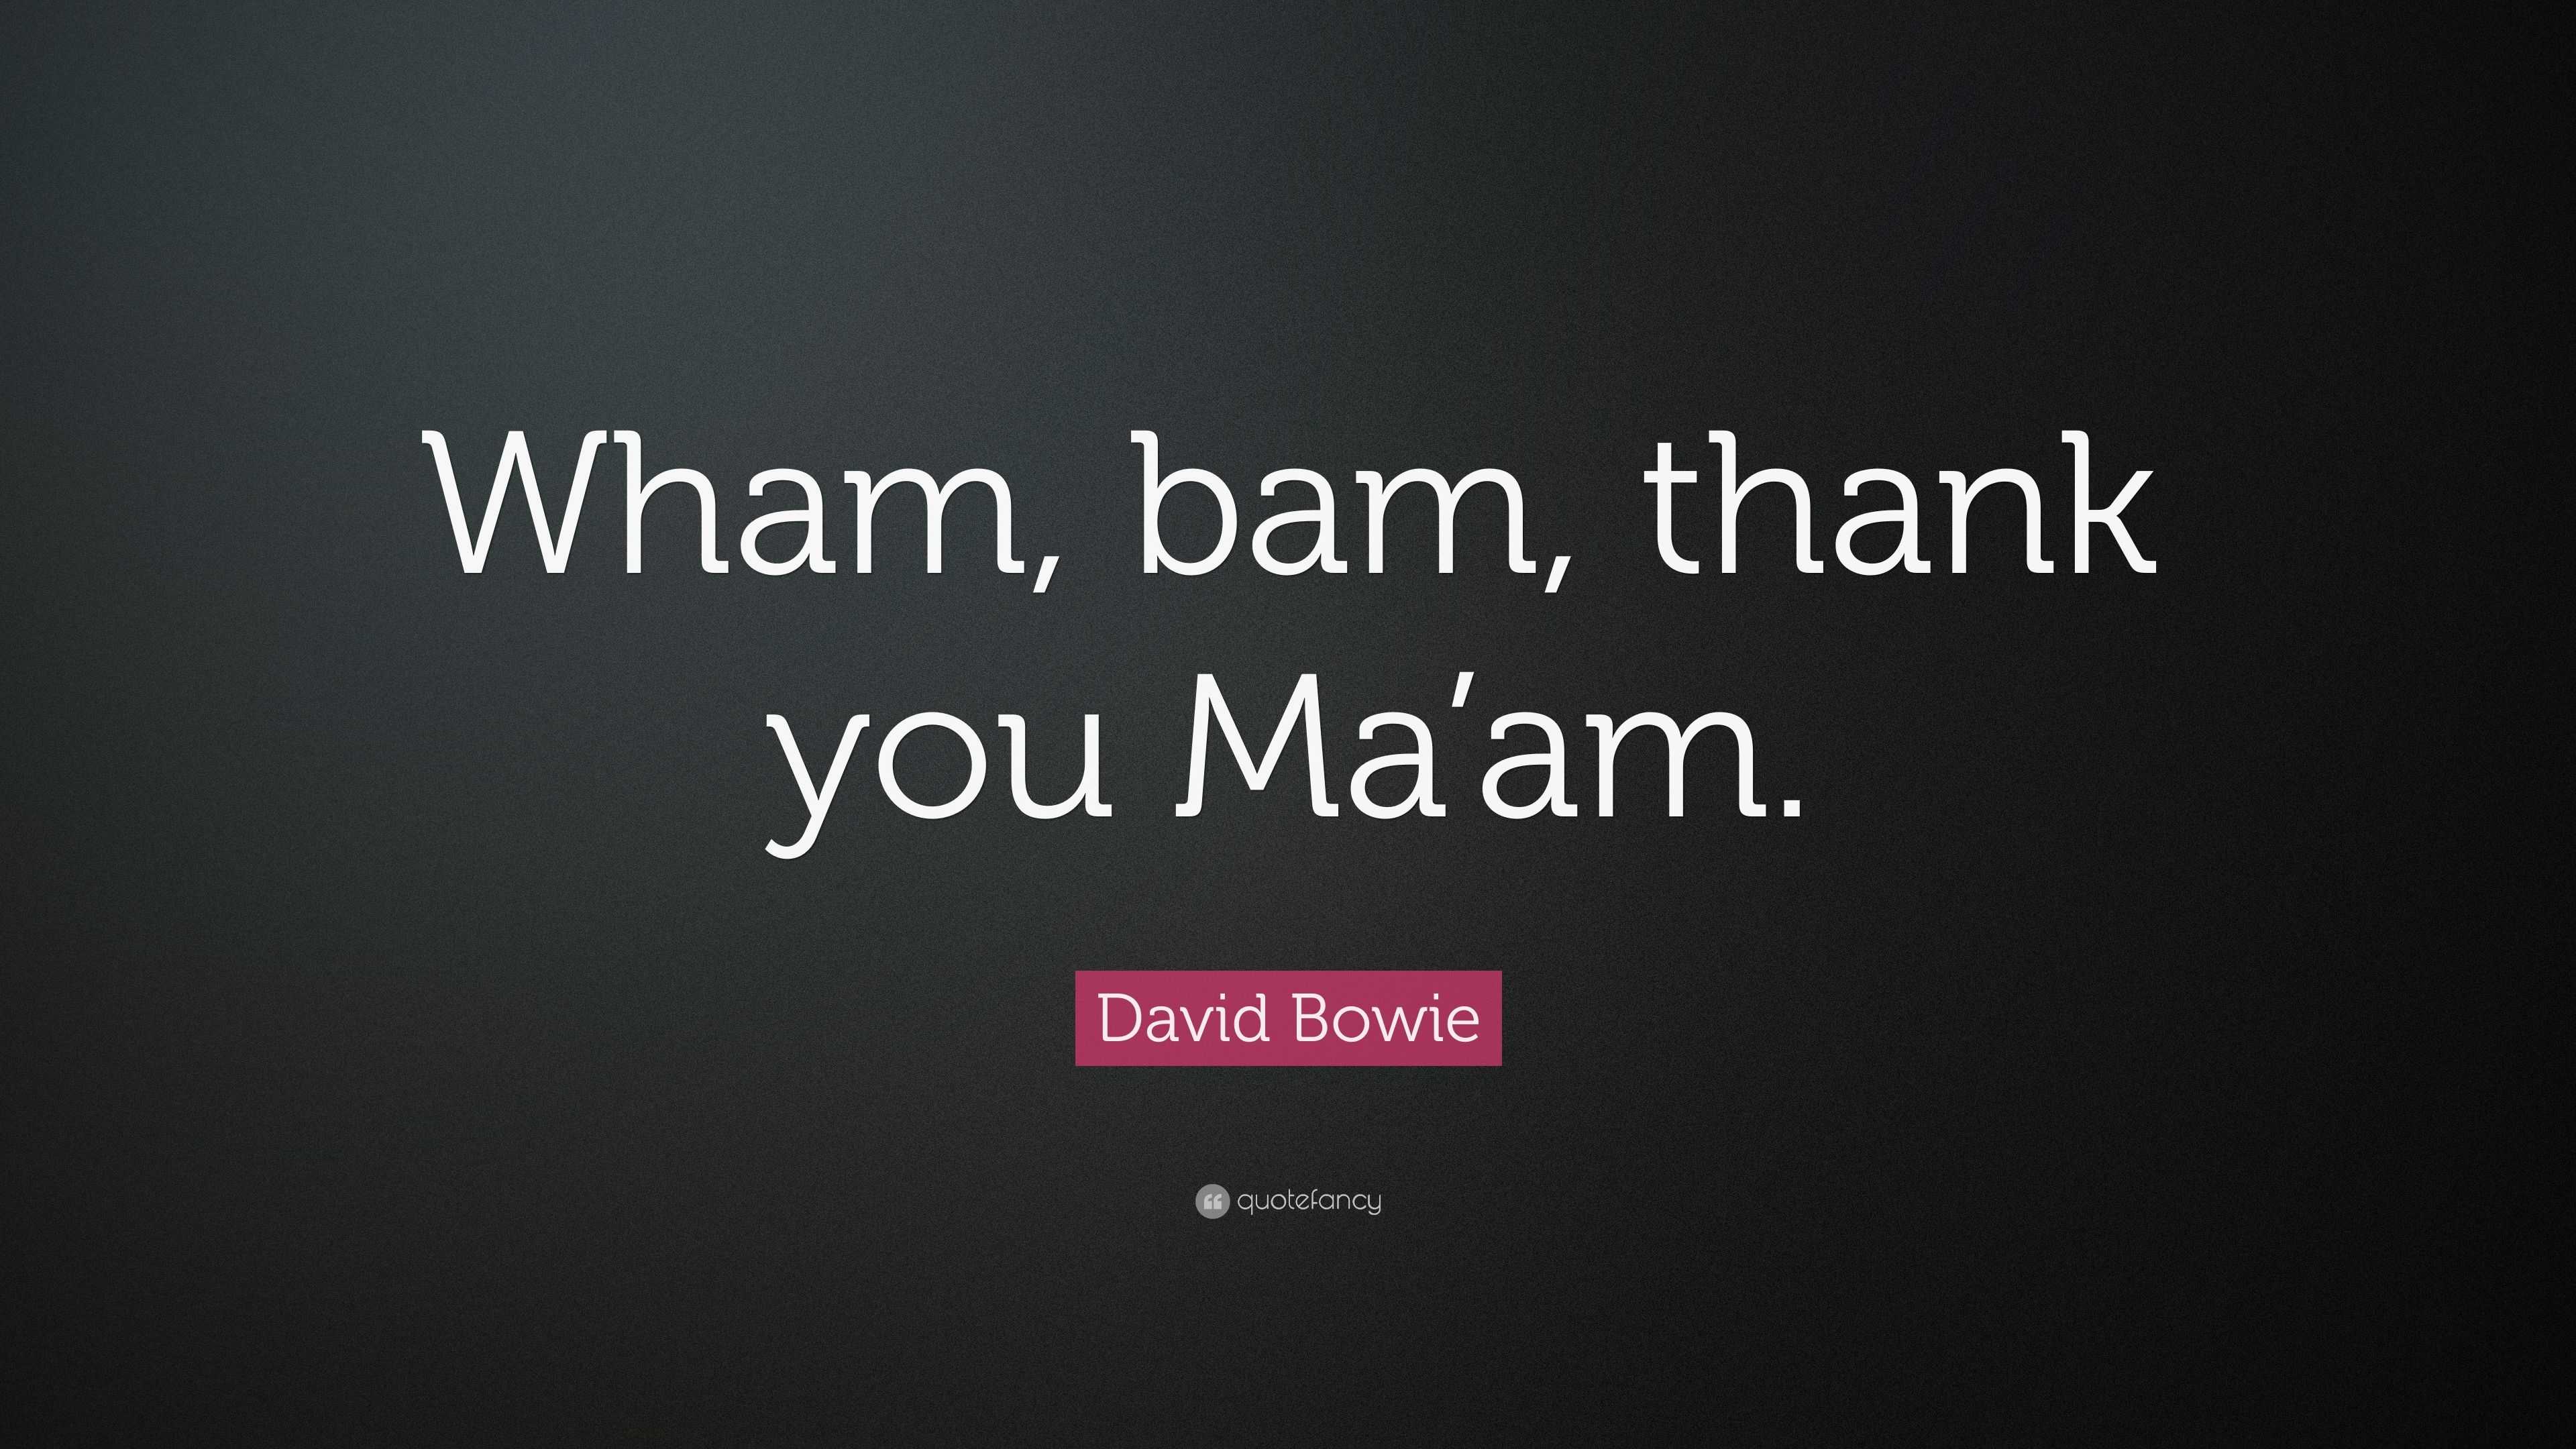 David Bowie Quote “wham Bam Thank You Maam” 5467